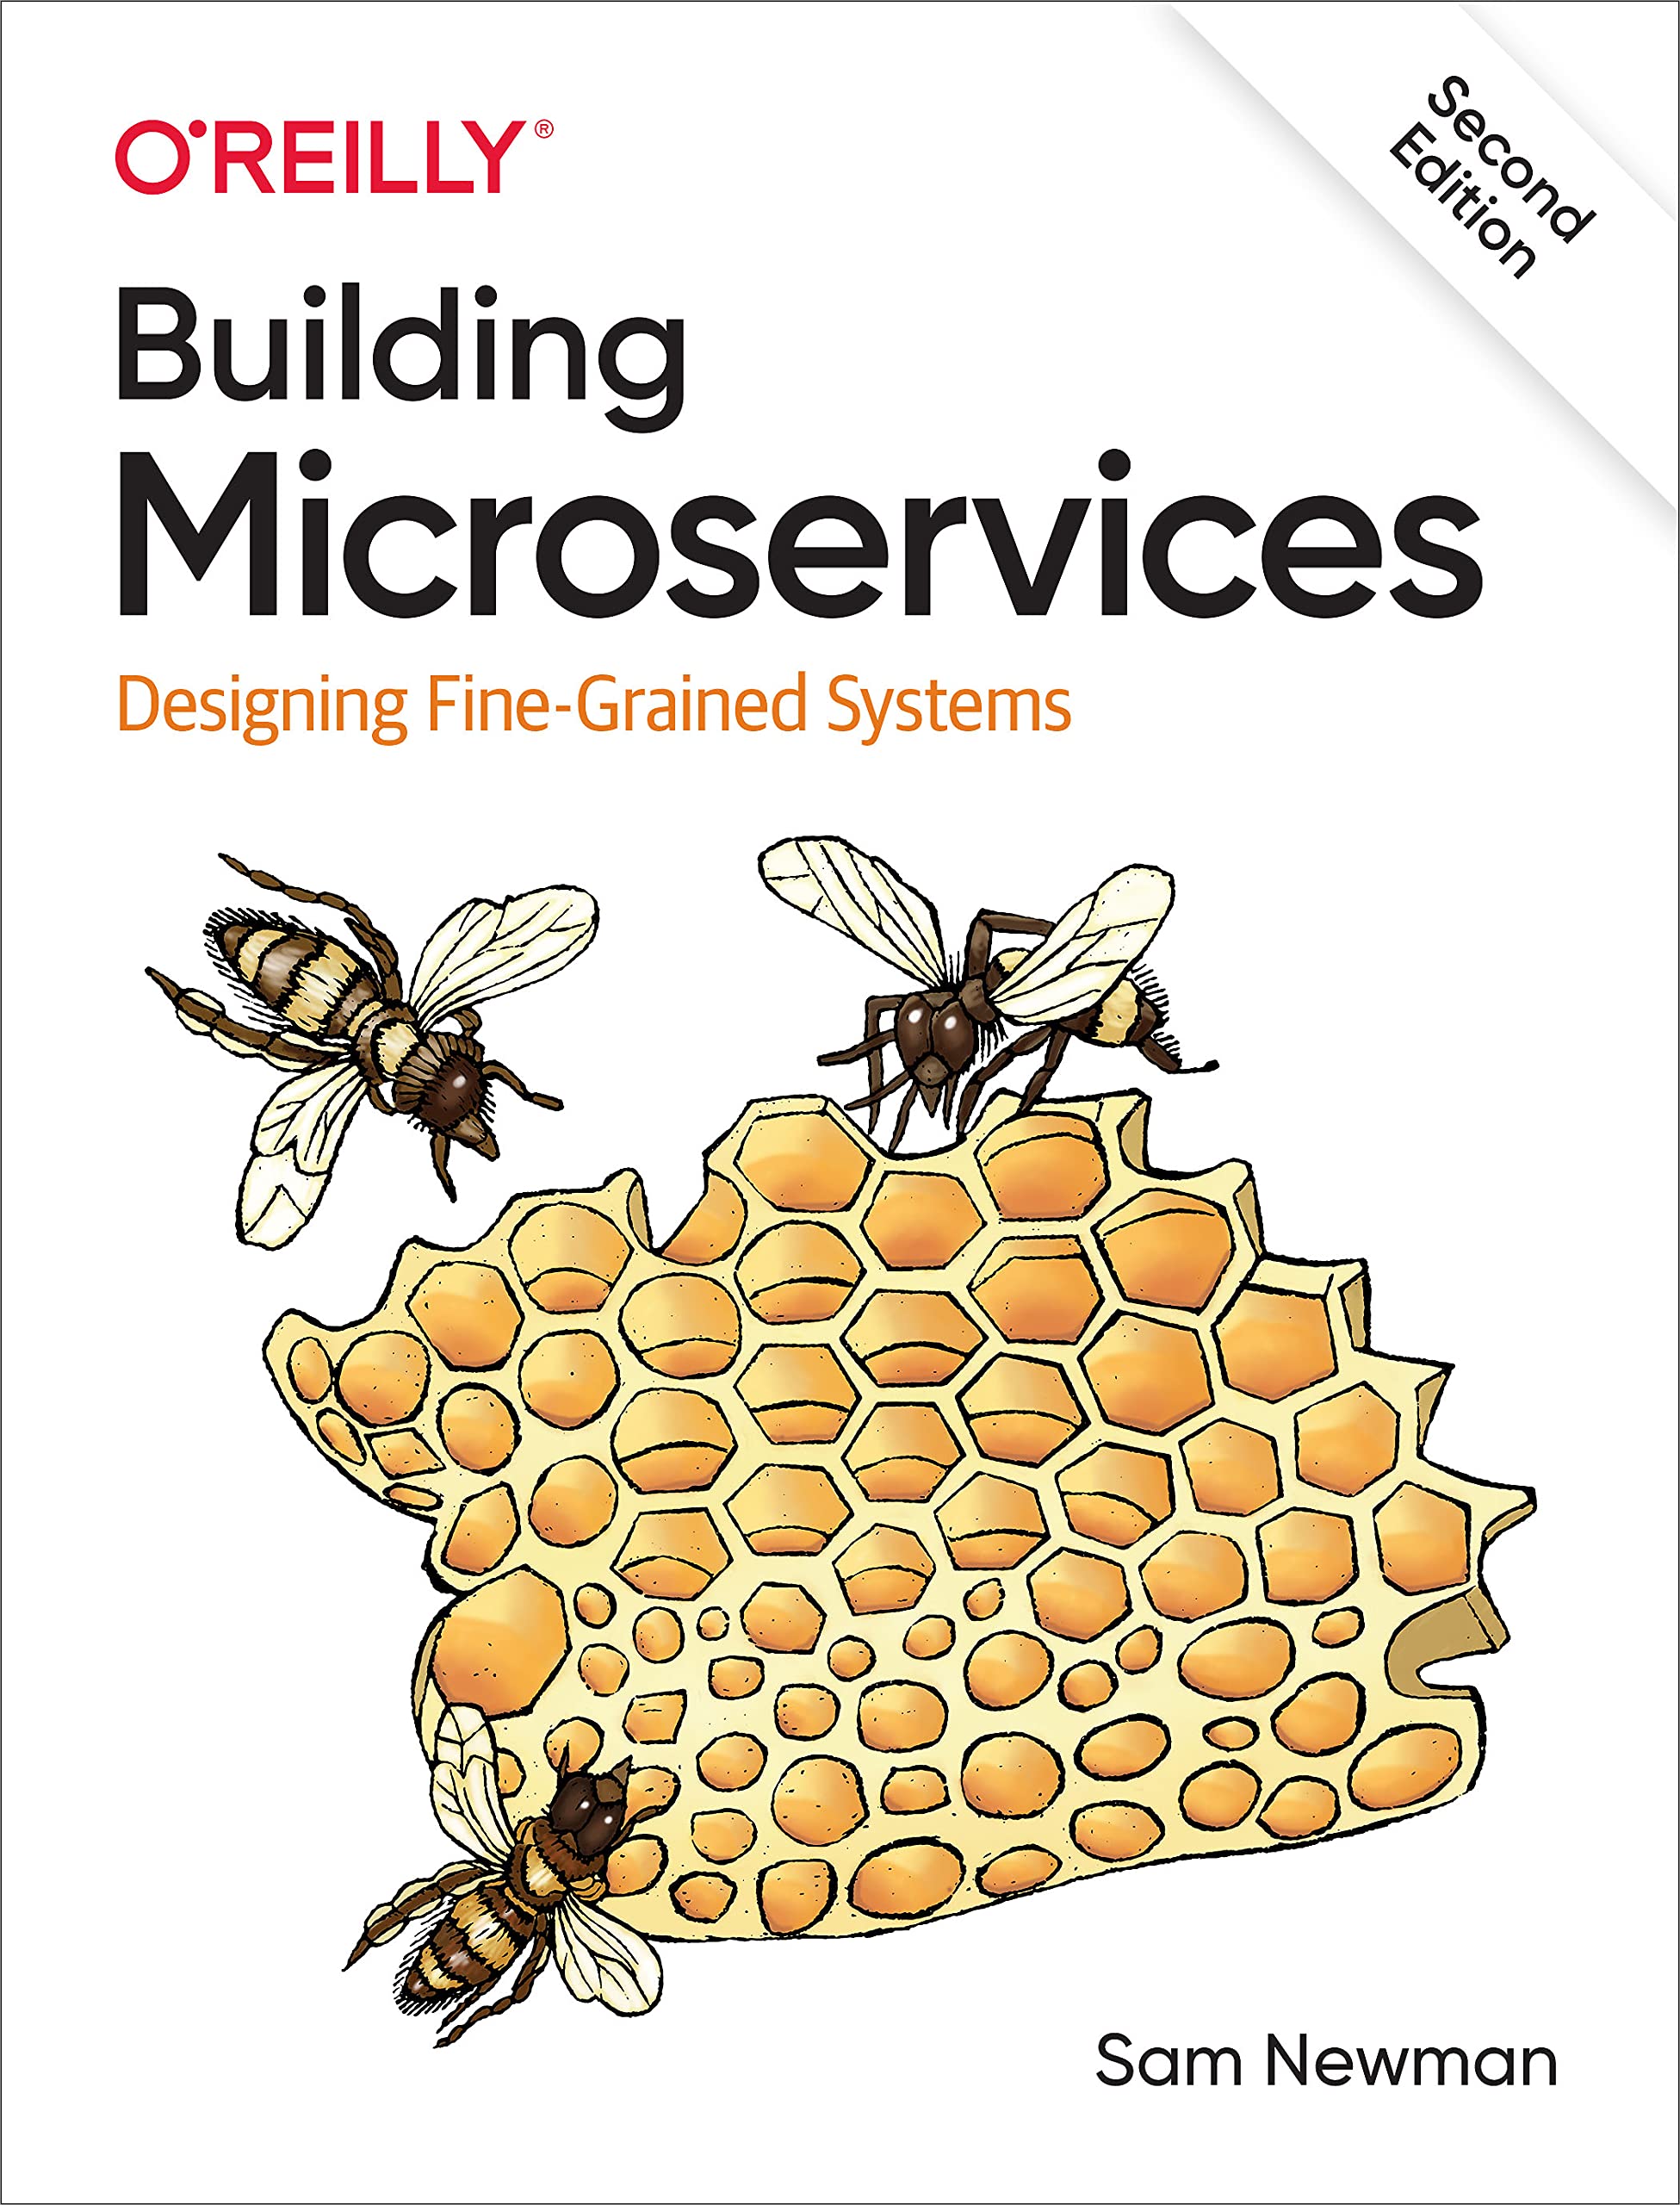 Bulding Microservices by Sam Newman